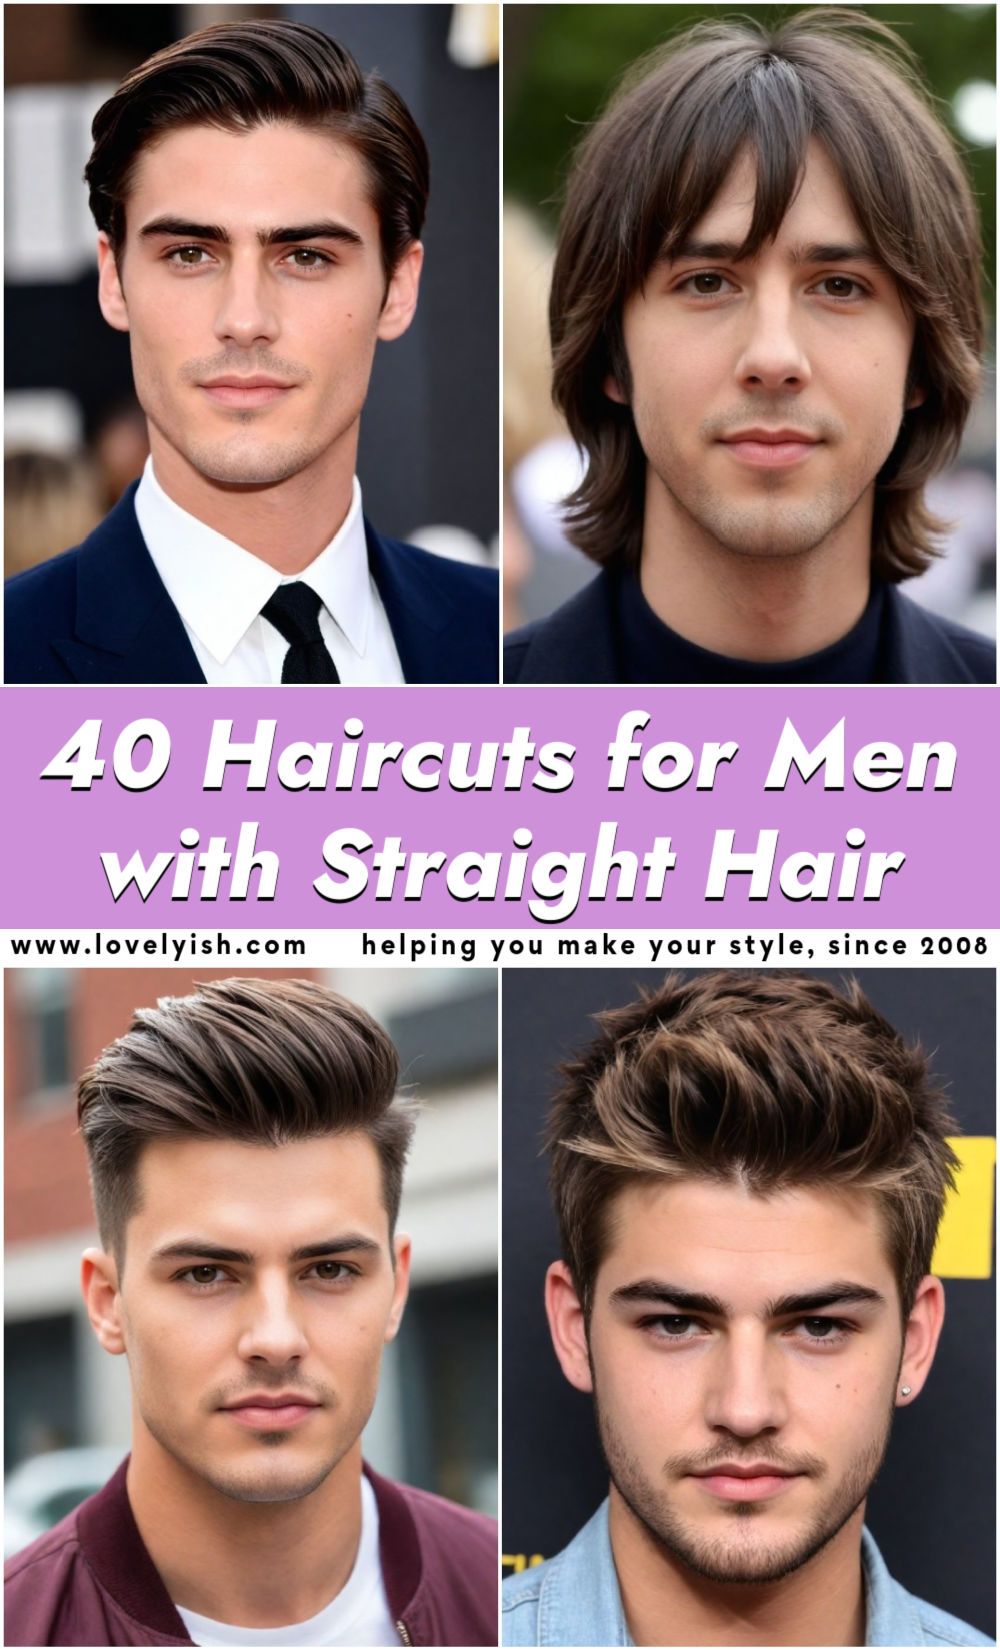 haircuts for men with straight hair